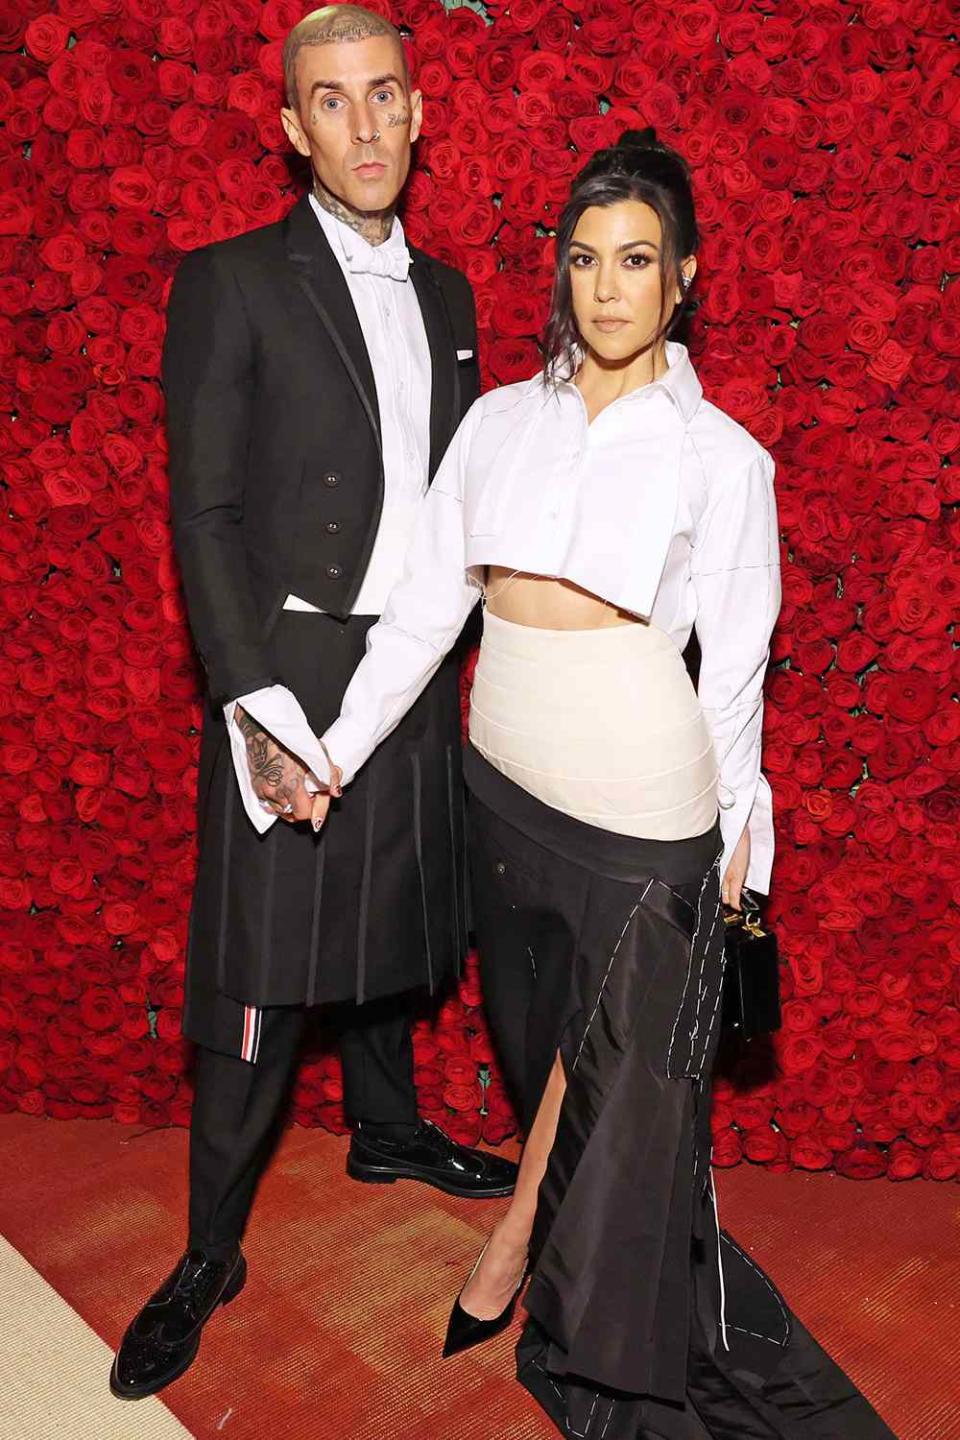 NEW YORK, NEW YORK - MAY 02: (Exclusive Coverage) (L-R) Travis Barker and Kourtney Kardashian attend The 2022 Met Gala Celebrating "In America: An Anthology of Fashion" at The Metropolitan Museum of Art on May 02, 2022 in New York City. (Photo by Cindy Ord/MG22/Getty Images for The Met Museum/Vogue )